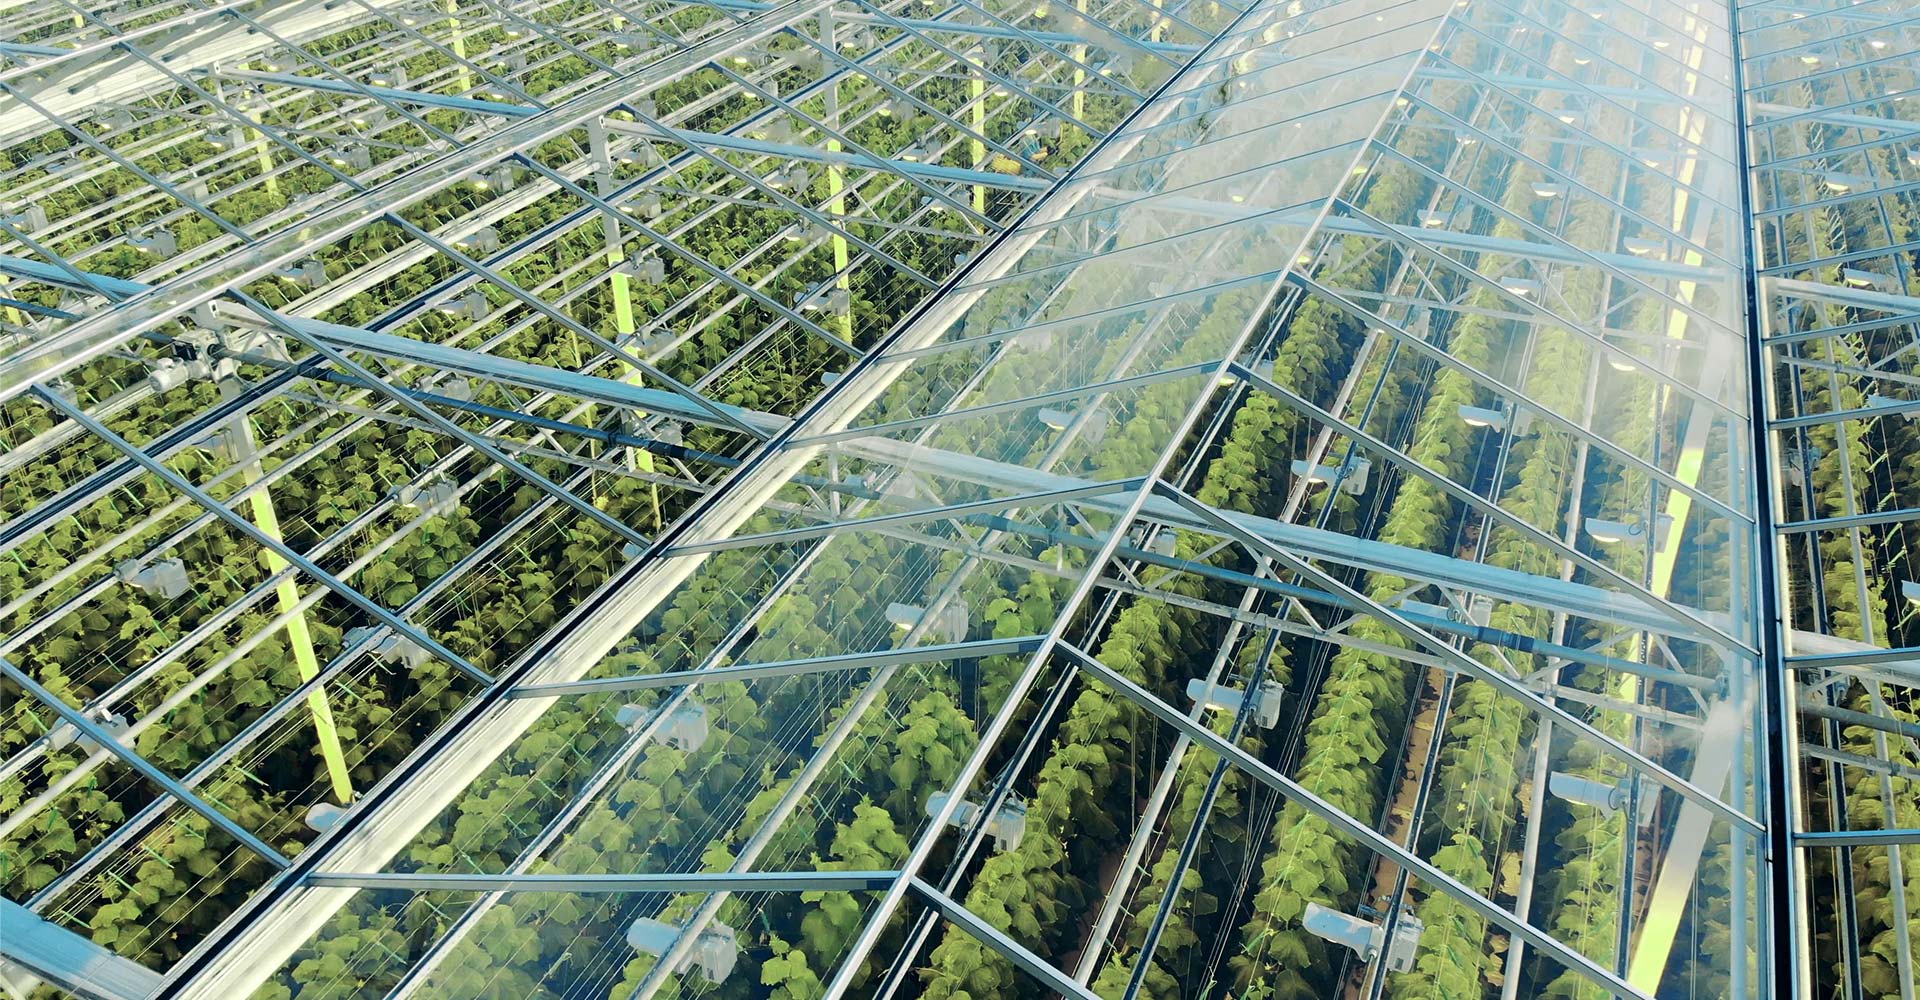 Aerial view of a large greenhouse with a glass roof, housing rows of plants in an organized pattern.